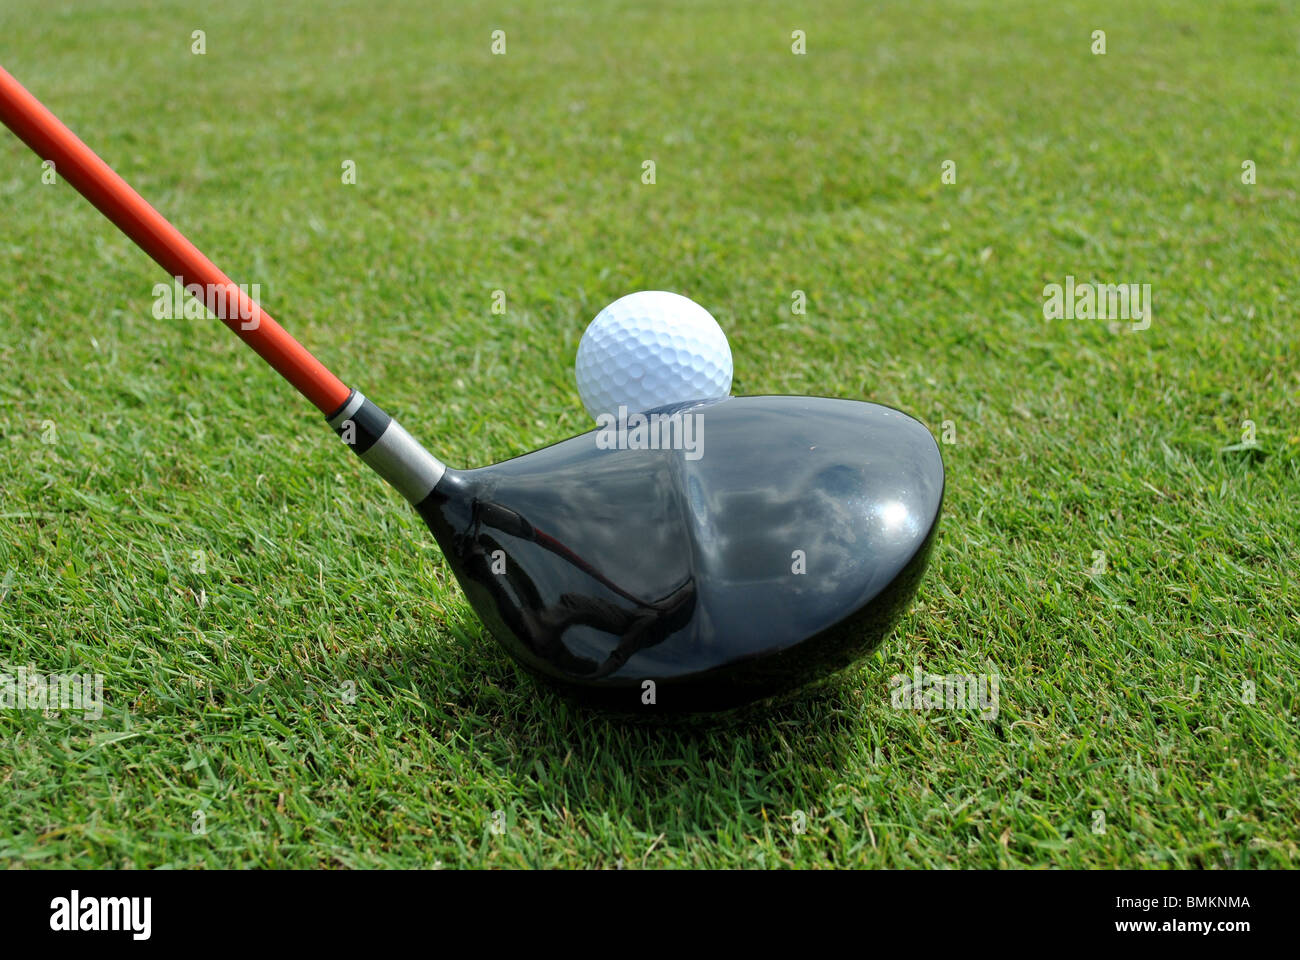 Pronto a tee off Foto Stock